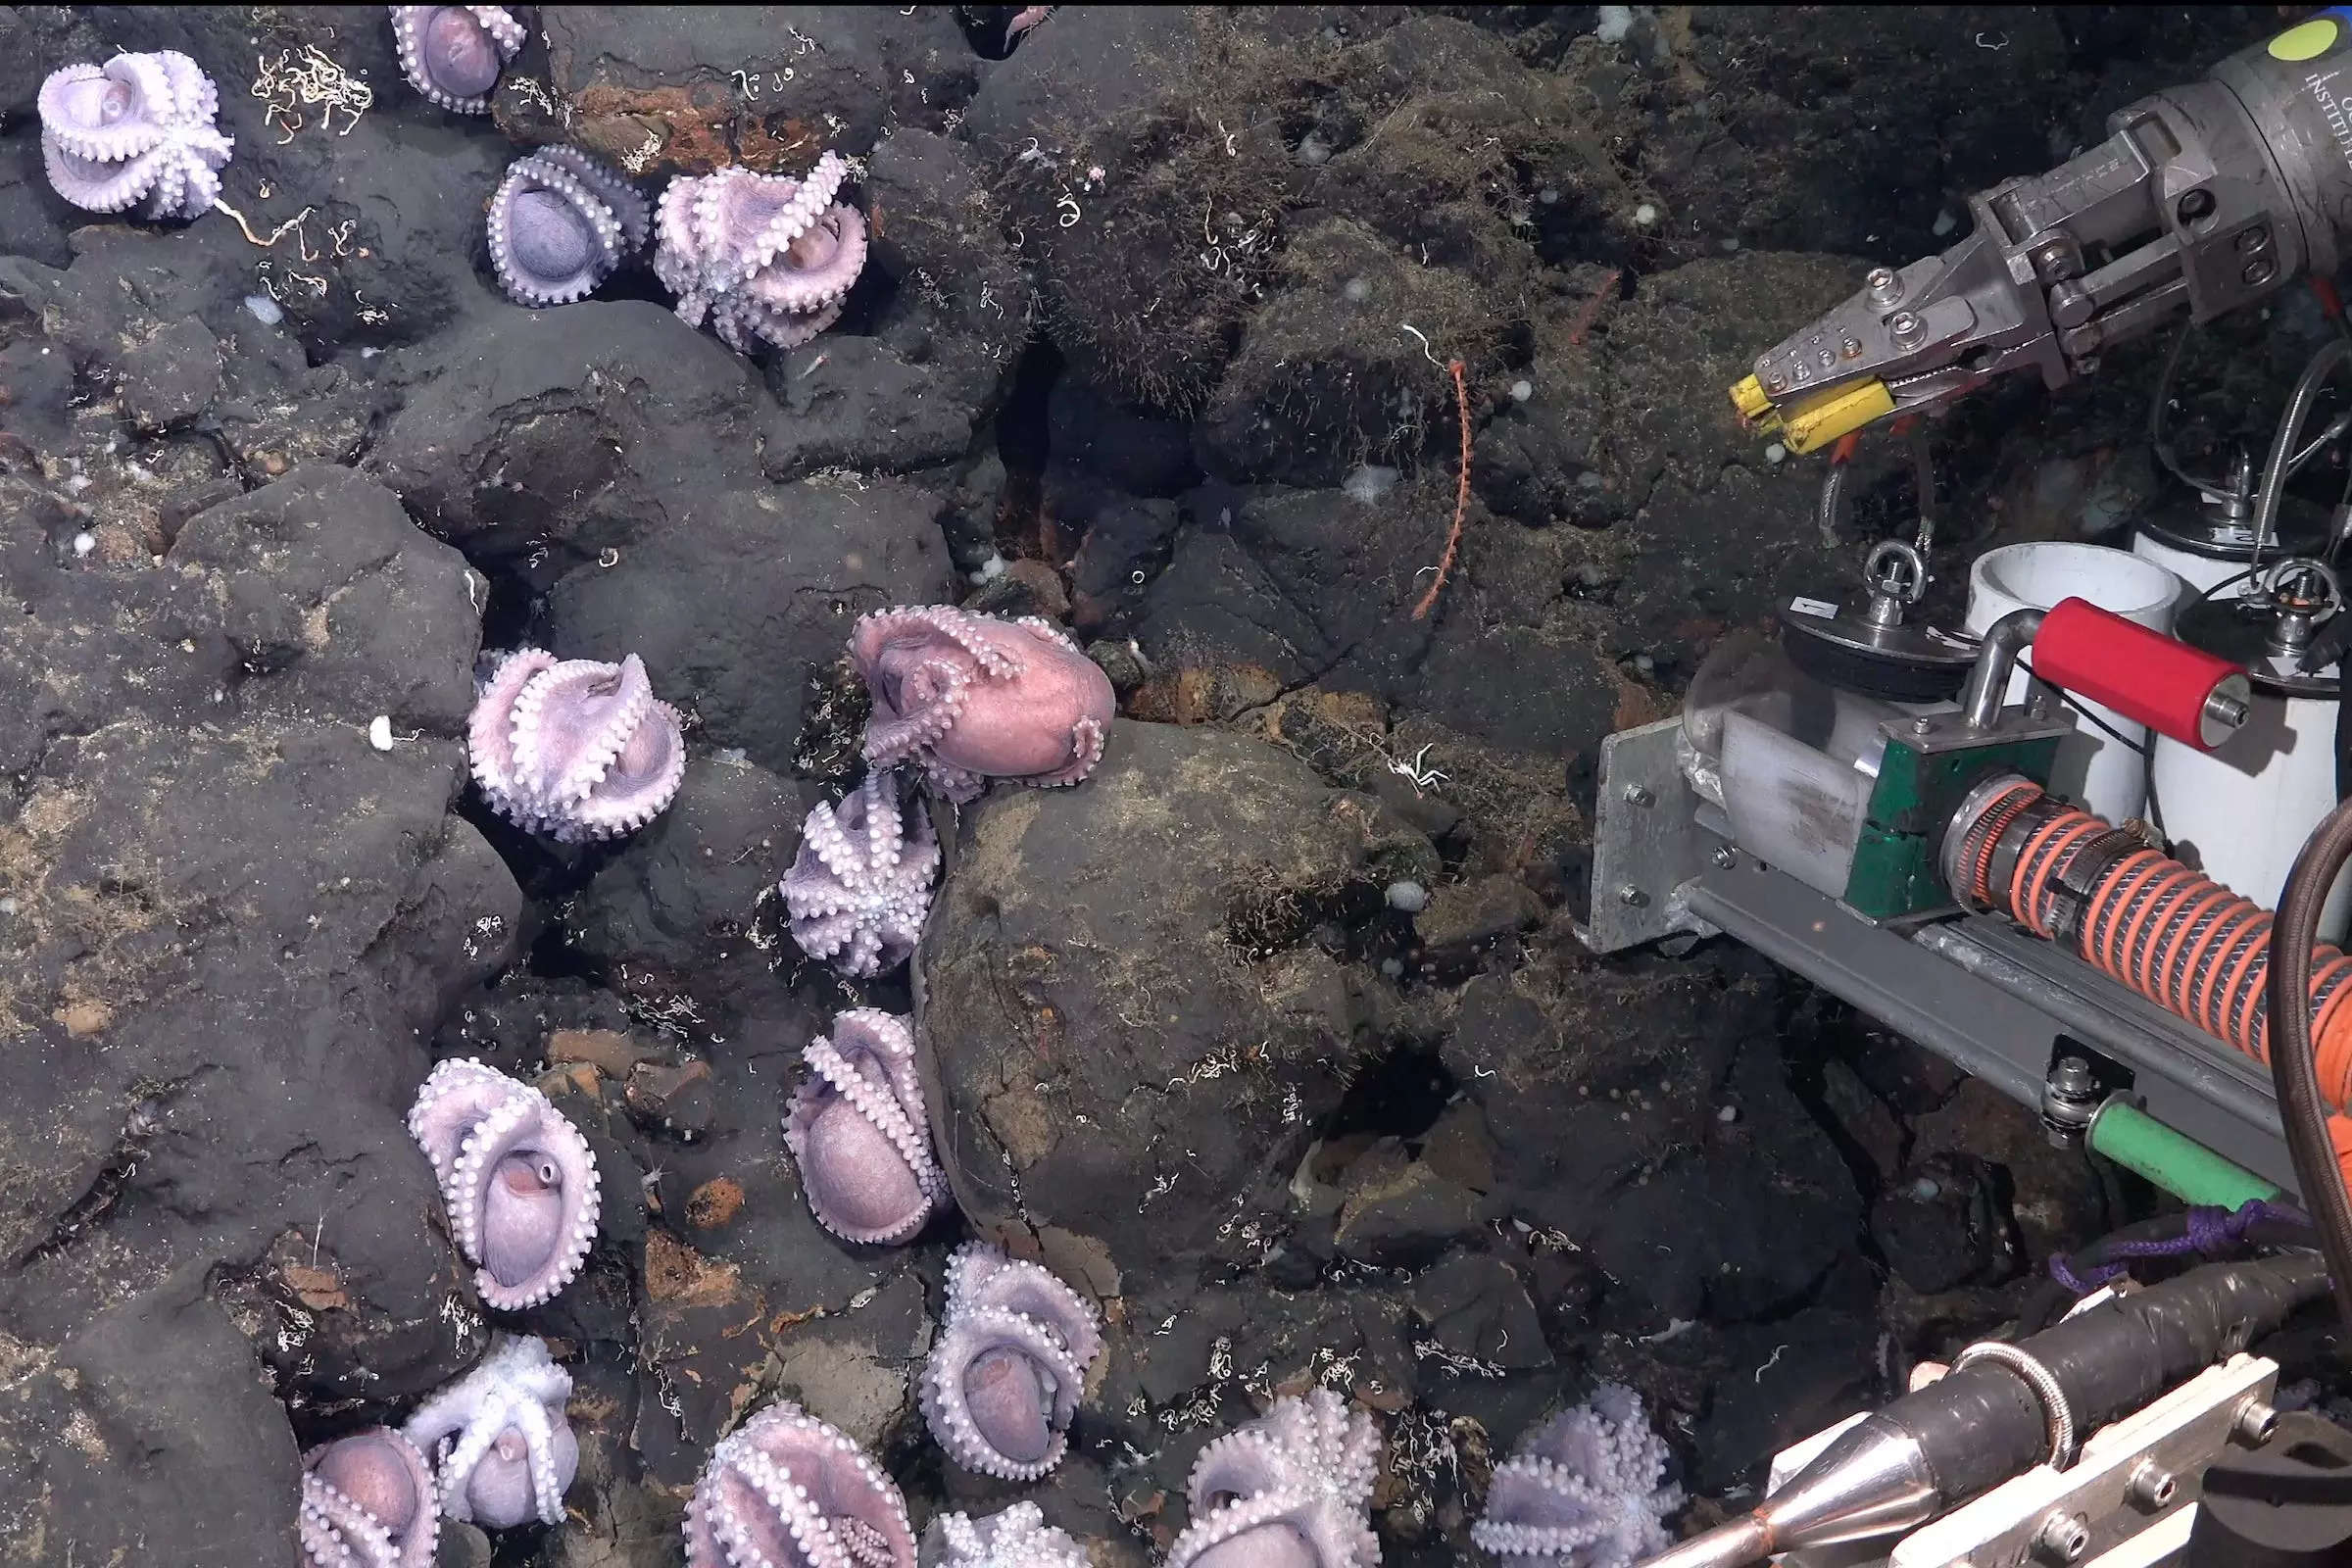 A picture shows tiny octopuses curled up in the cracks of a deep-sea rock.